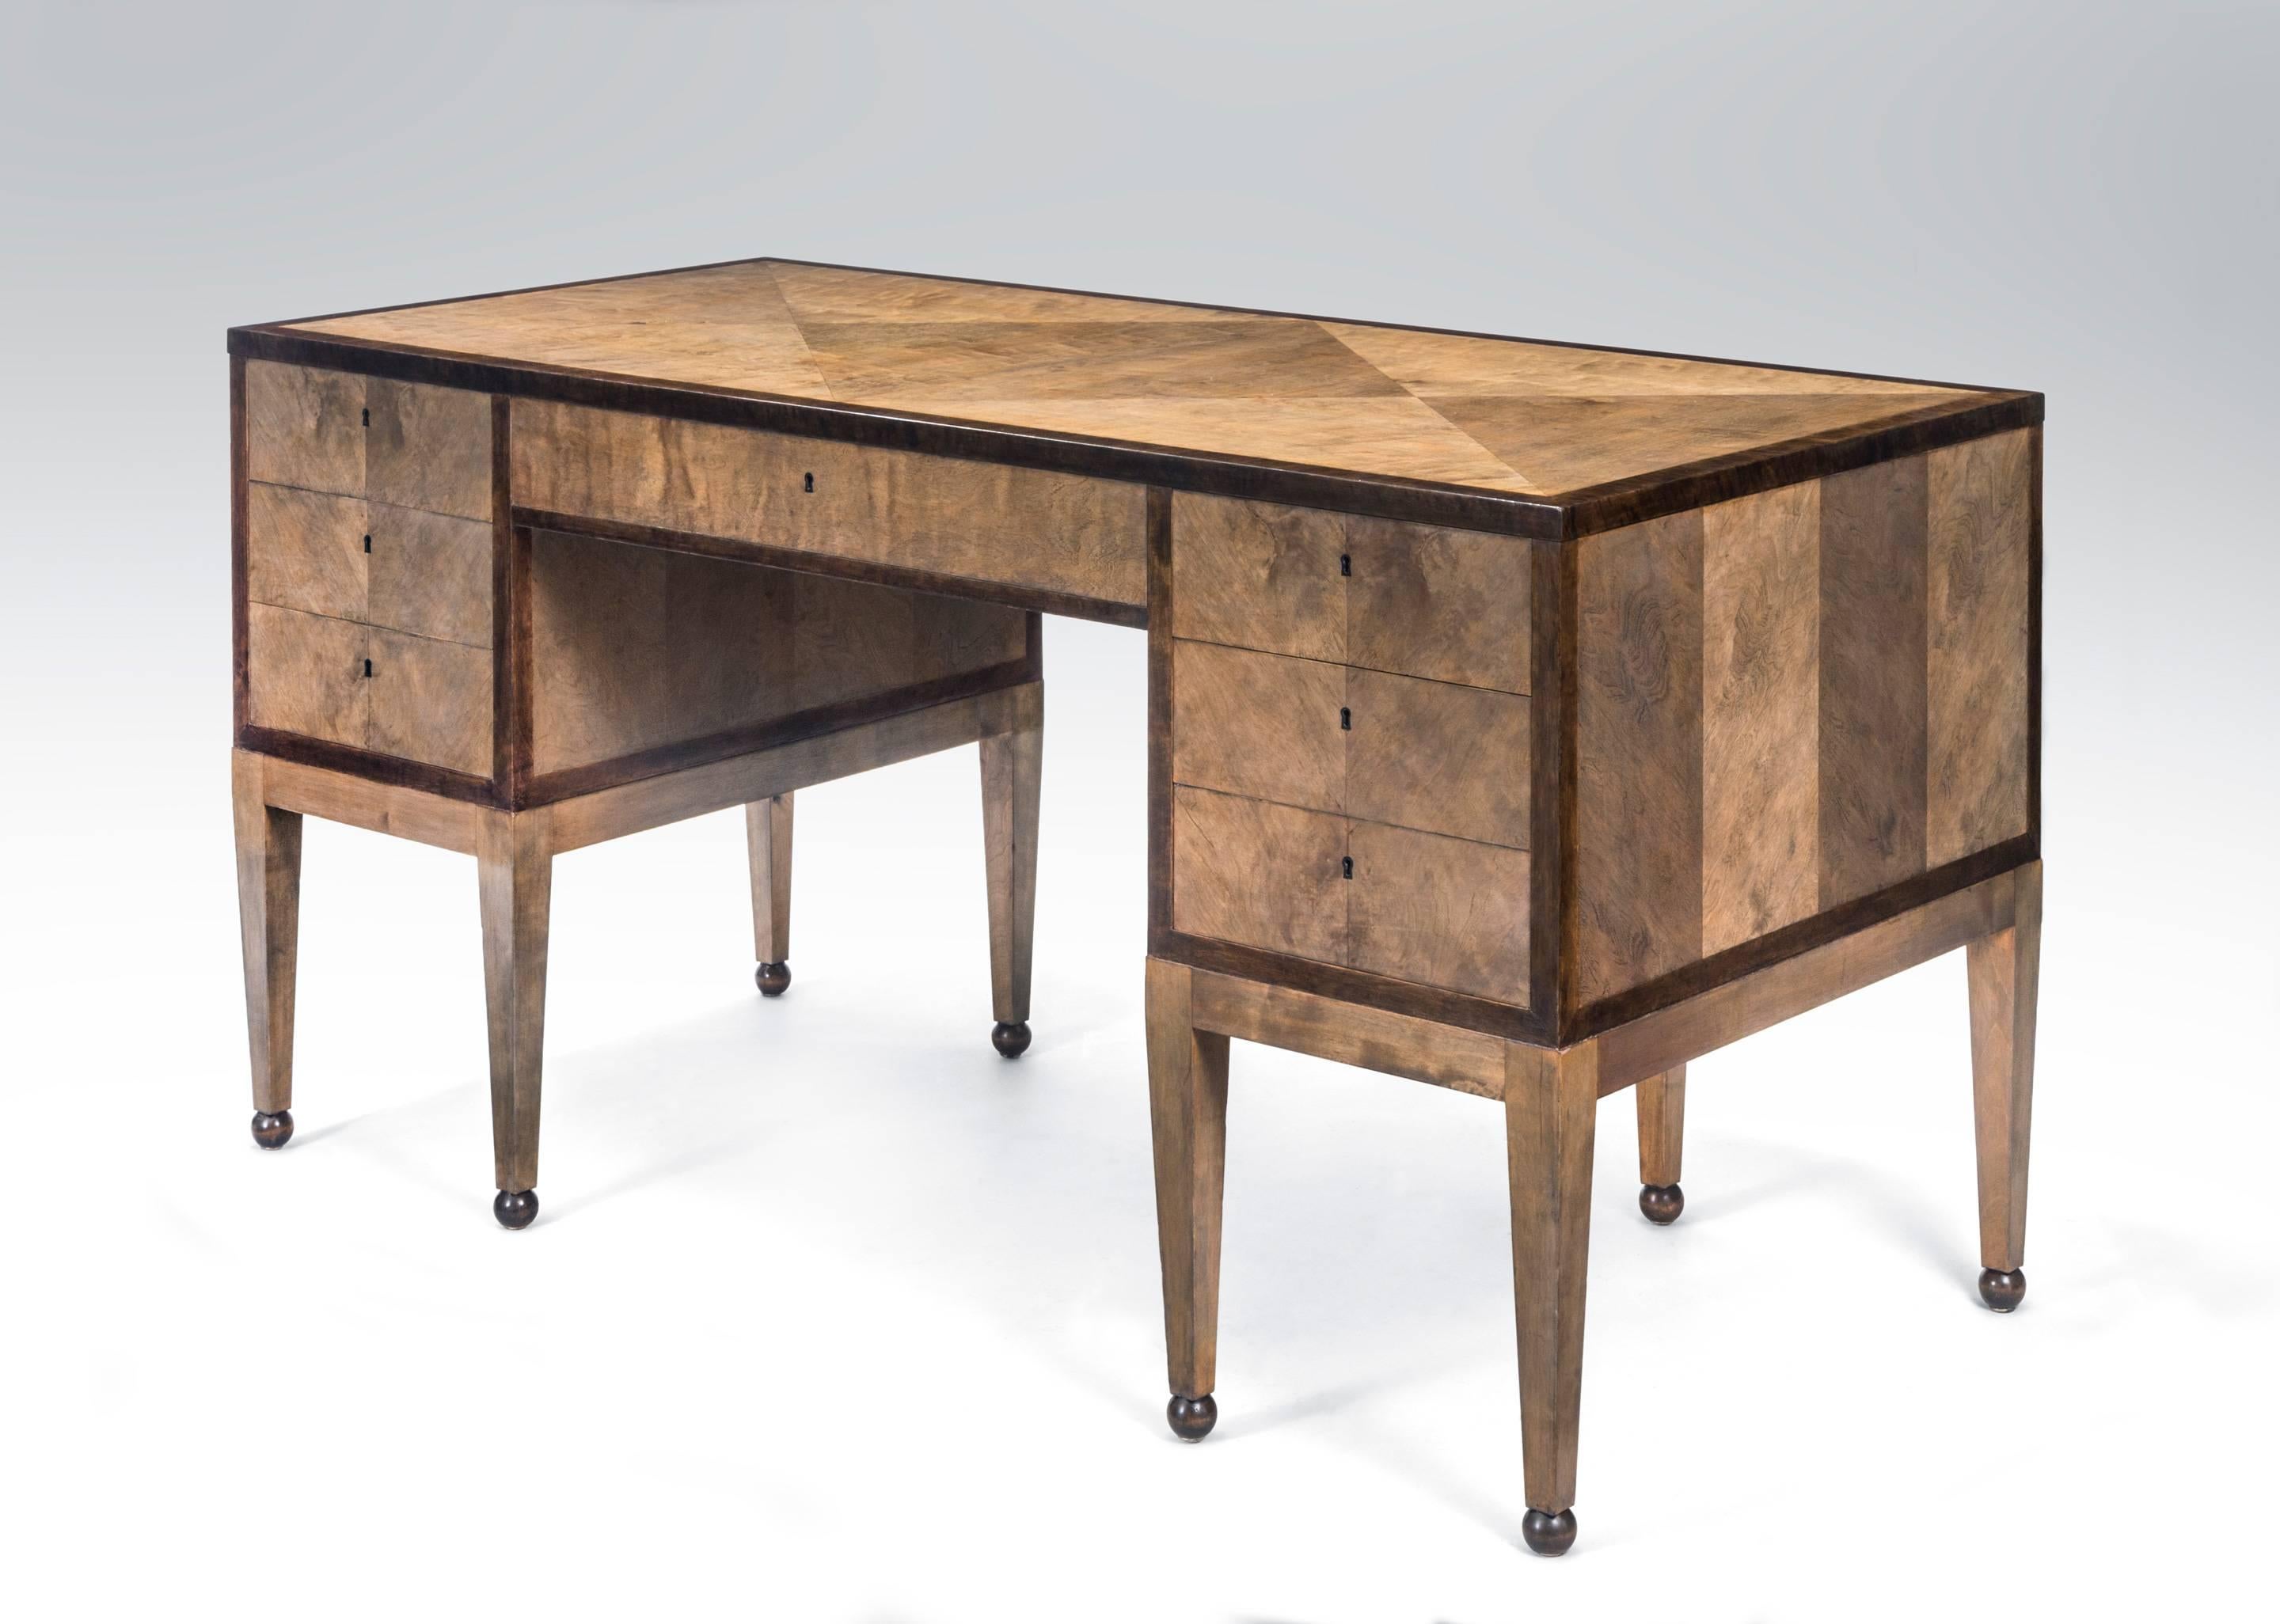 A Carl Malmsten attributed Swedish Grace Period  Birch Pedestal Desk, circa 1930.
A very useful and nicely proportioned 7 drawer desk composed of attractive gray stained birch with an elegant   contrasting banding. The rectangular parquetry birch